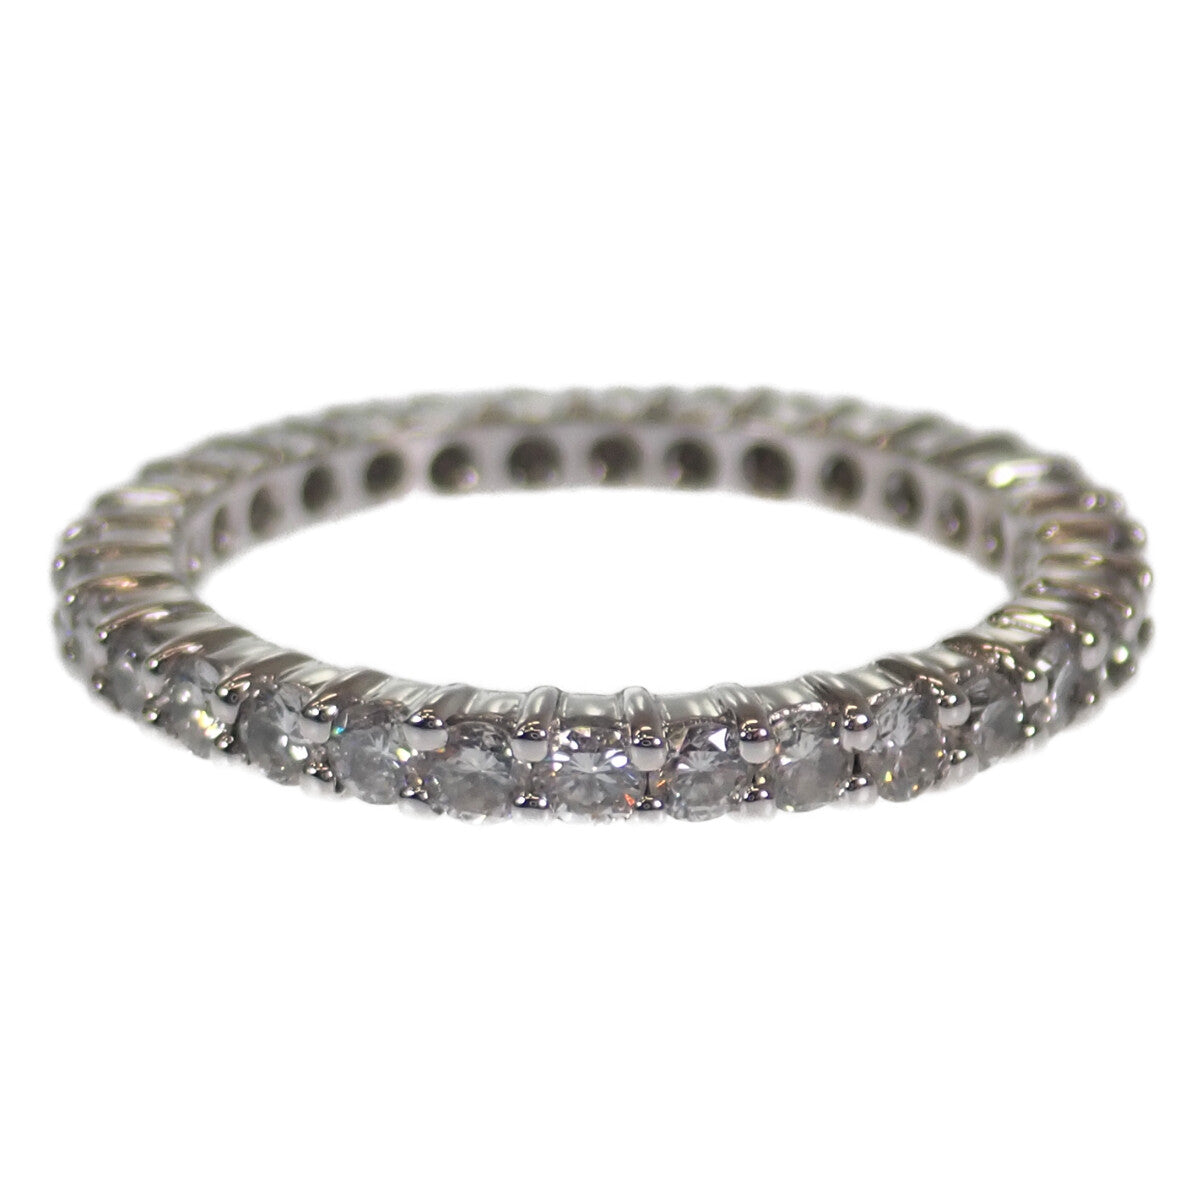 K18 White Gold Full Eternity Design Ring with 1.06ct Diamonds, Size 12 - Silver, for Women- Ideal for Special Occasions- (Pre-owned)